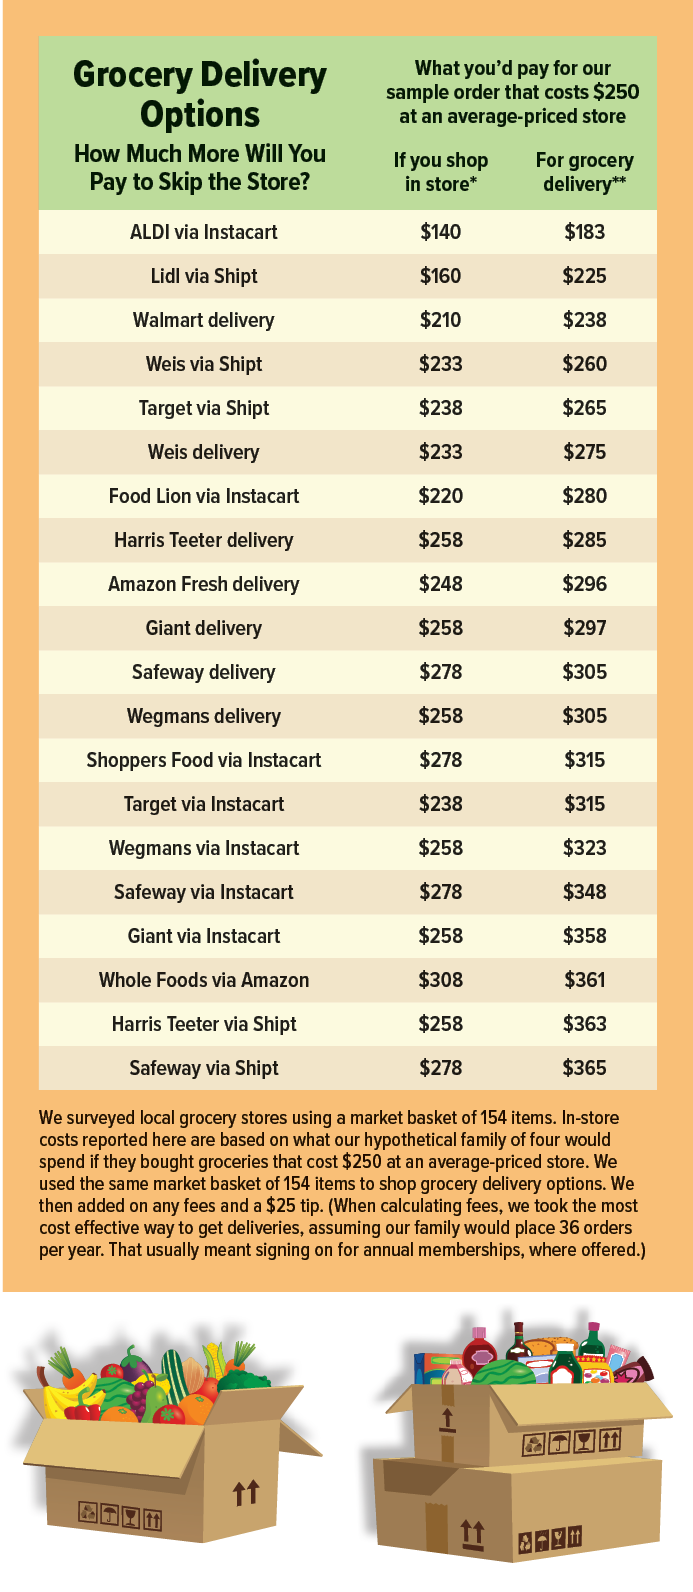 Whole Foods to go chainwide with new grocery delivery fee